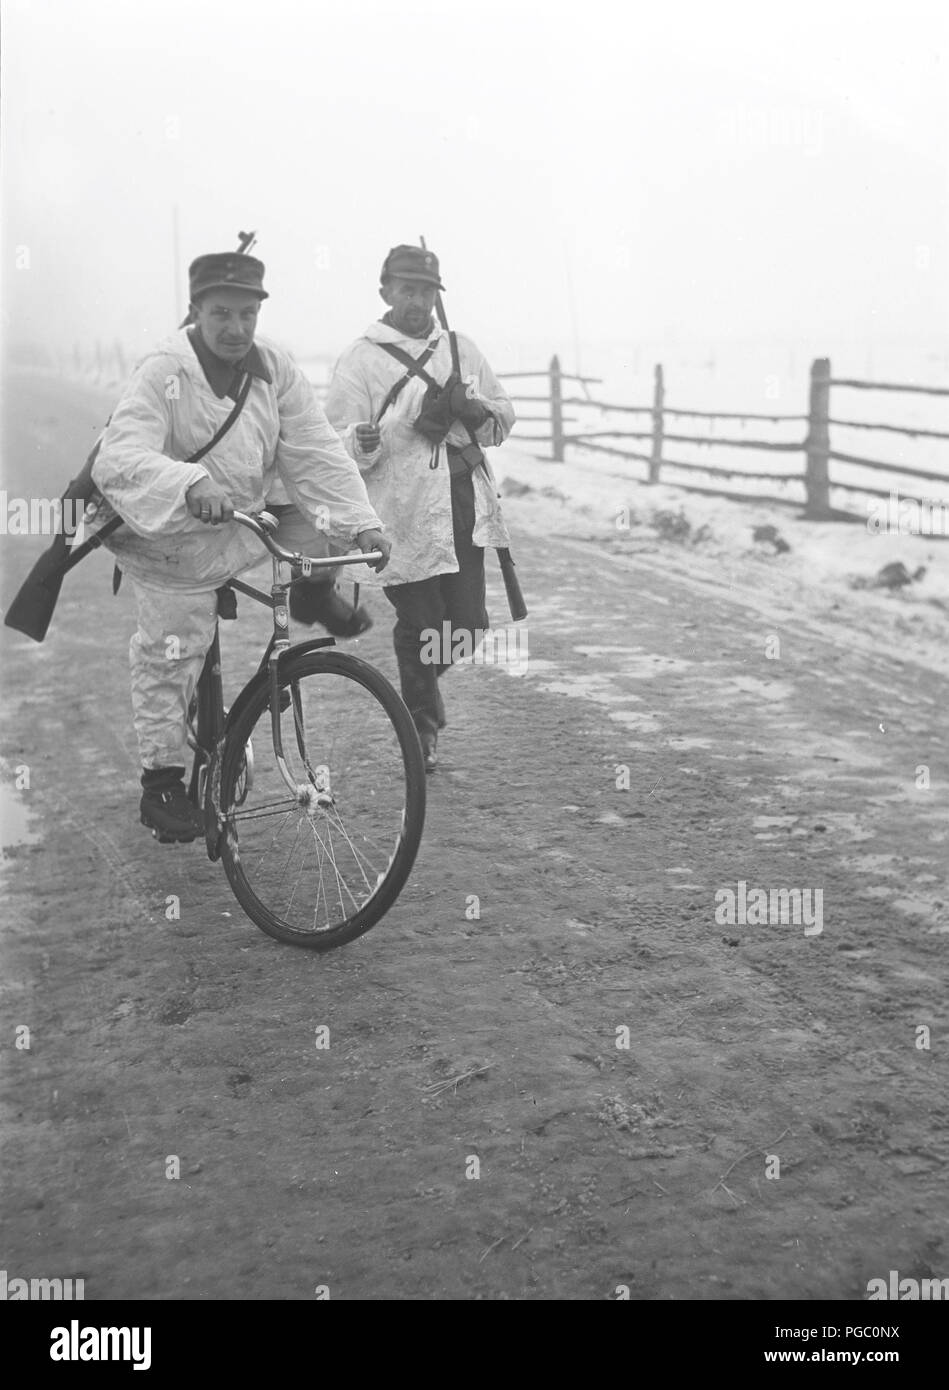 Winter war Finland 1939. A finnish soldier transporting messages on his bicycle close to the front at the Mannerheim line. Photographer Kristoffersson is a war photographer during the first months of the military conflict between the Soviet Union and Finland. Picture taken one month after the outbreak. December 1939 Finland. Photo Kristoffersson 94-3 Stock Photo